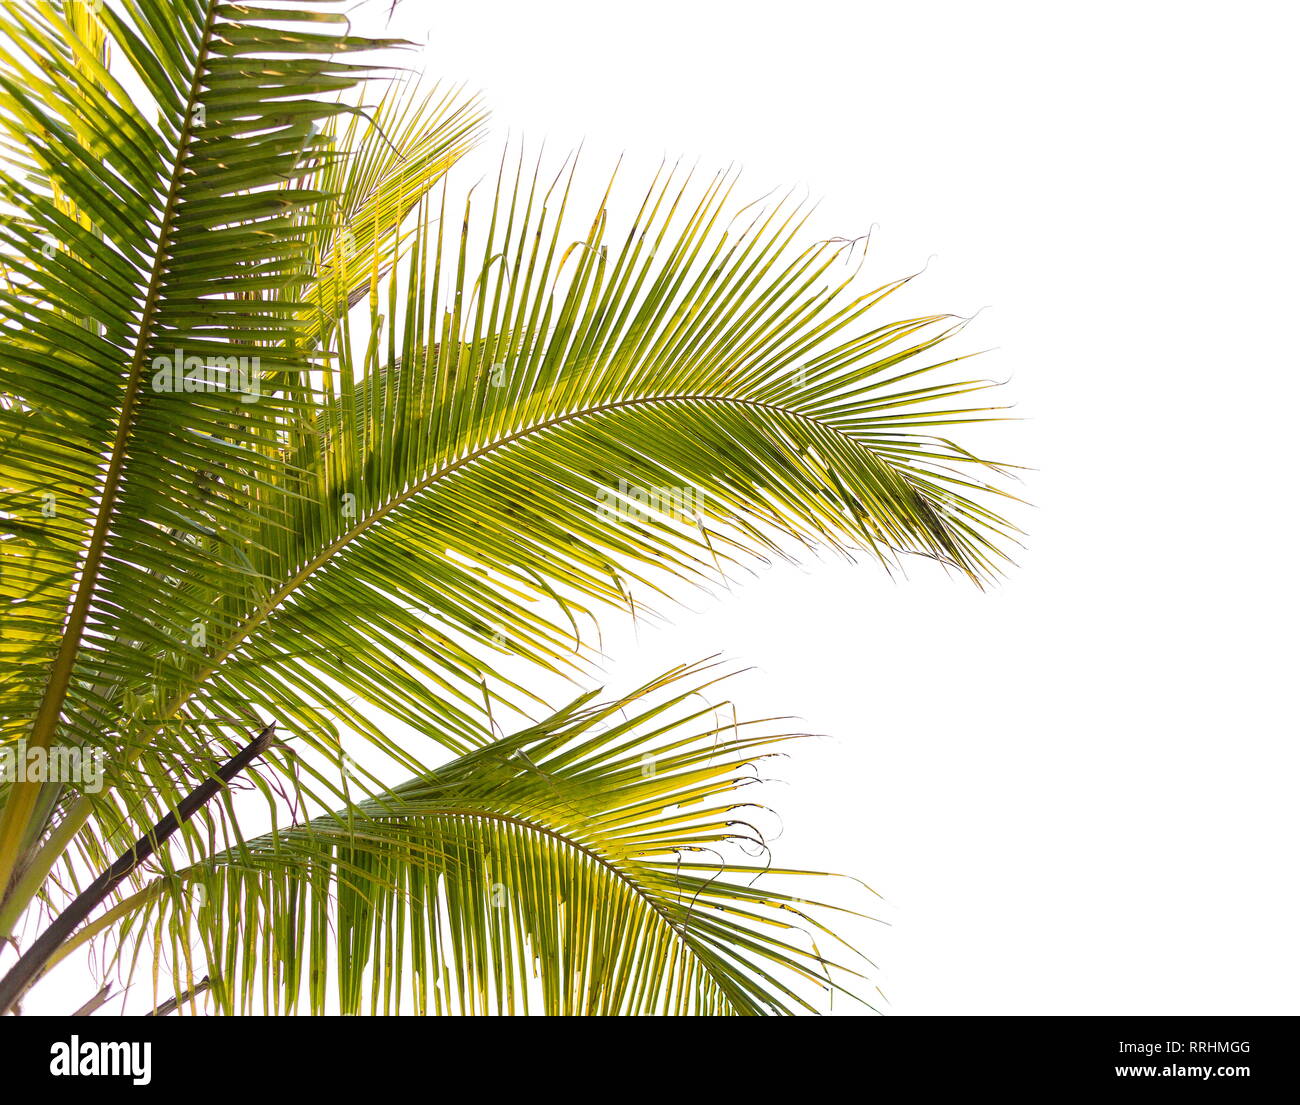 Under coconut tree and coconut leaves on a white background Stock Photo -  Alamy